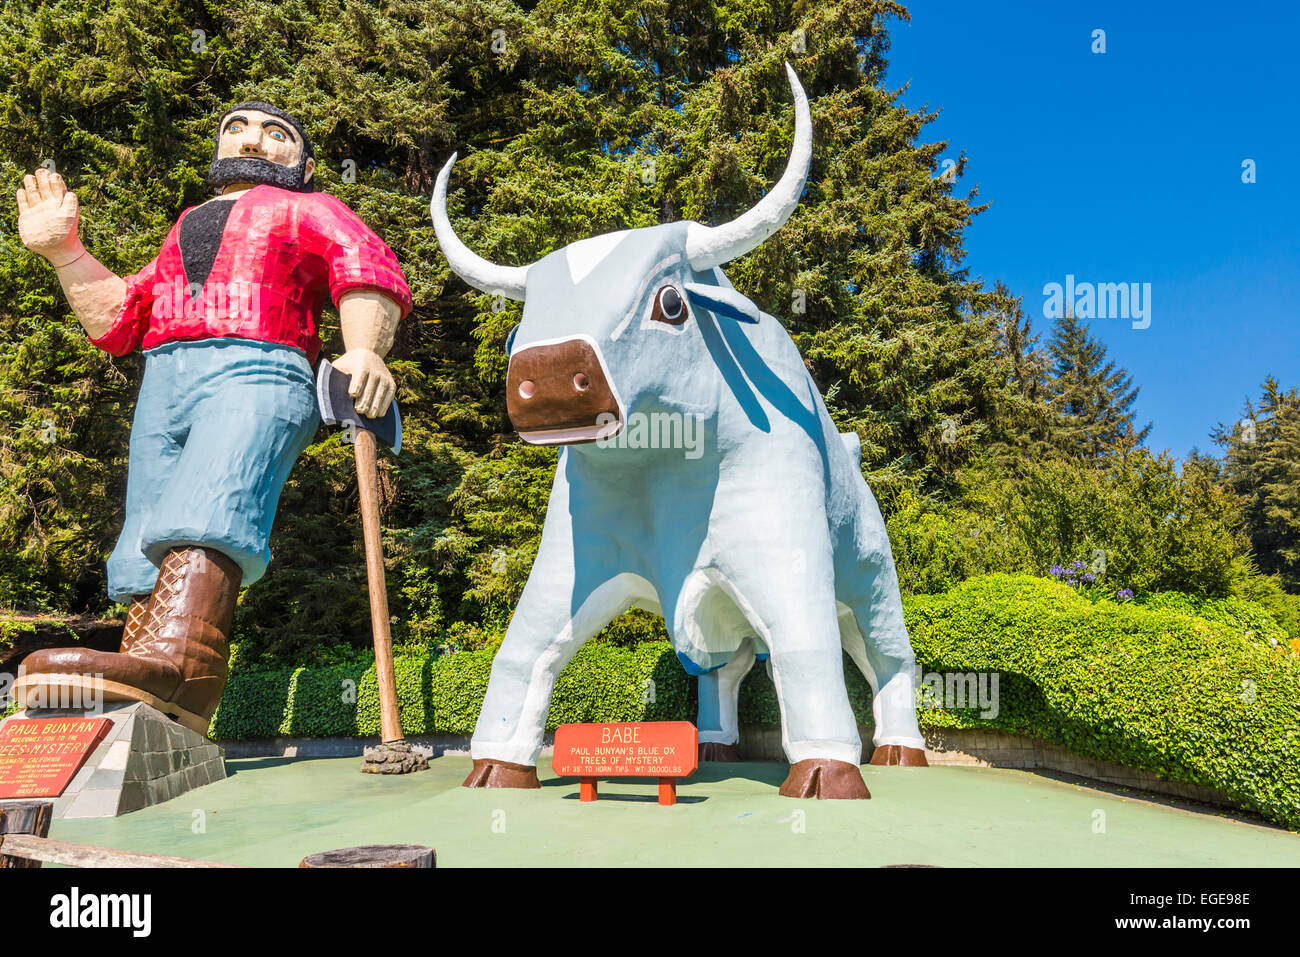 Paul Bunyan and Babe the Blue Ox statues. Trees of Mystery, Klamath, California, United States. Stock Photo